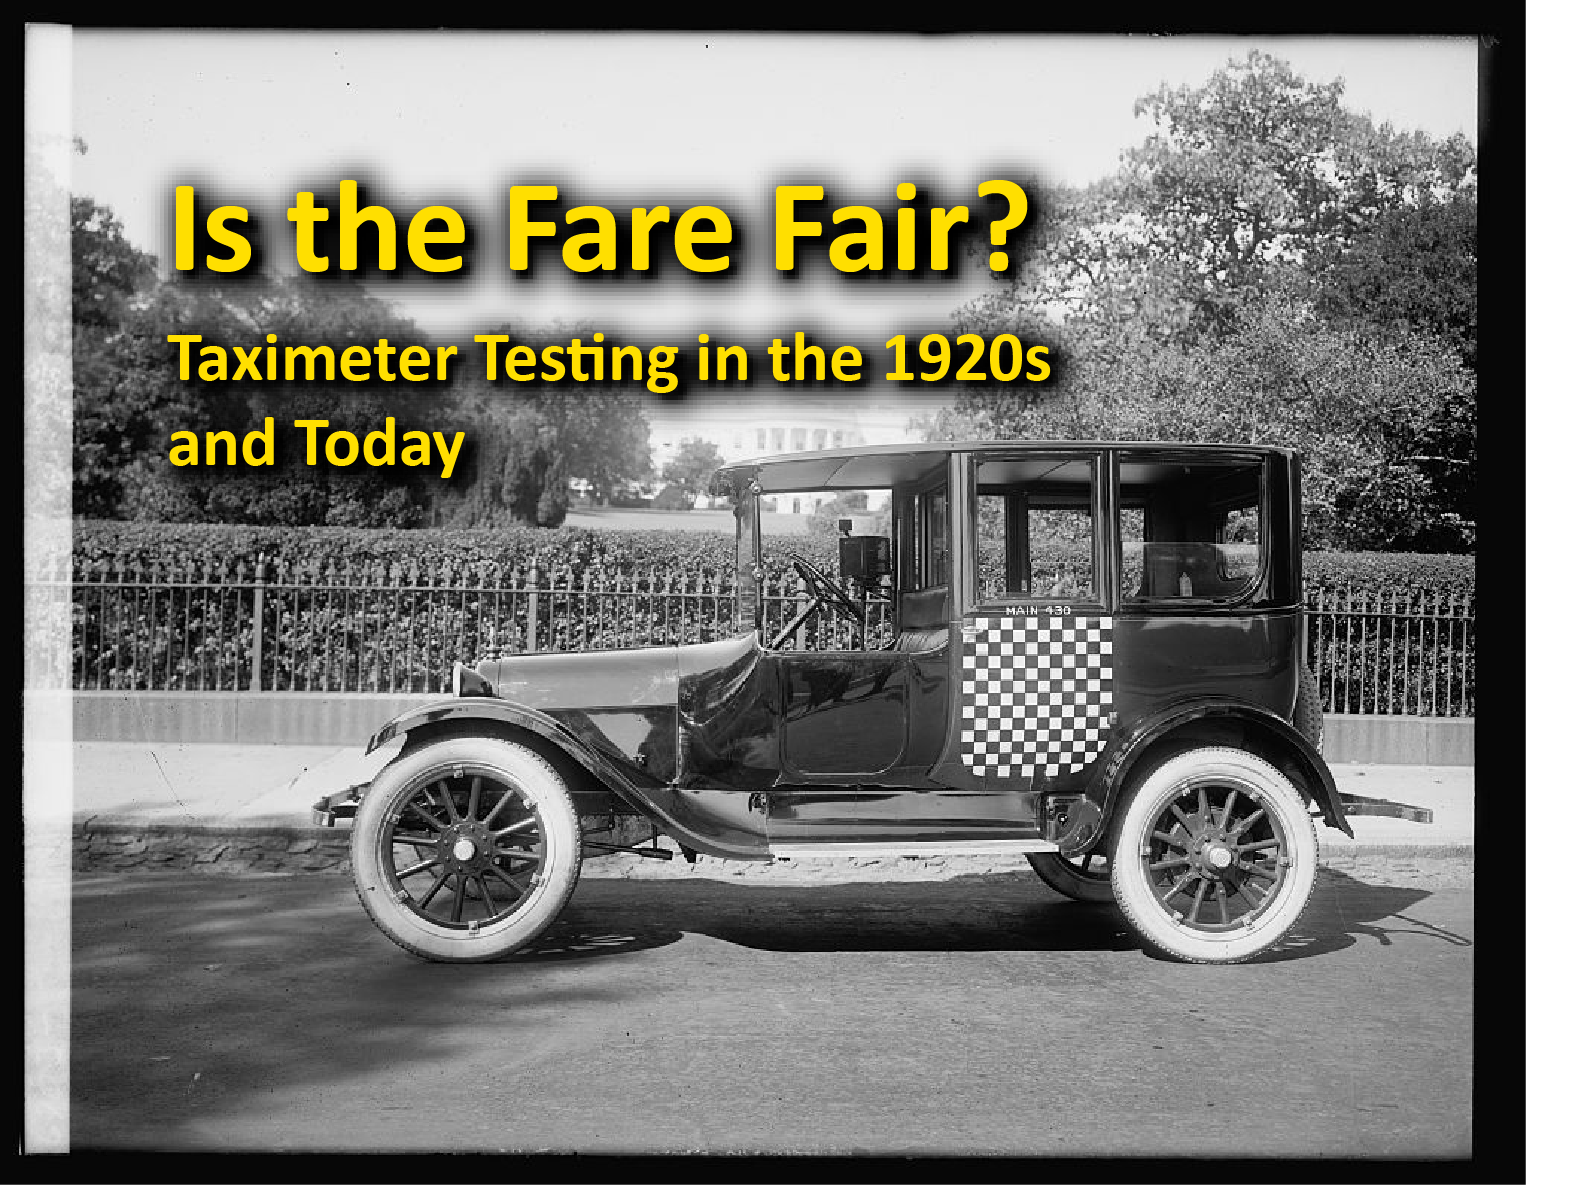 Is the Fare Fair? exhibit Hero image for exhibit link. Black and White image of 1921 Checker taxi in Washington, D.C. with the exhibit title 'Is the Fare Fair? Taximeter Testing in the 1920s and Today' in yellow at the top of the image.